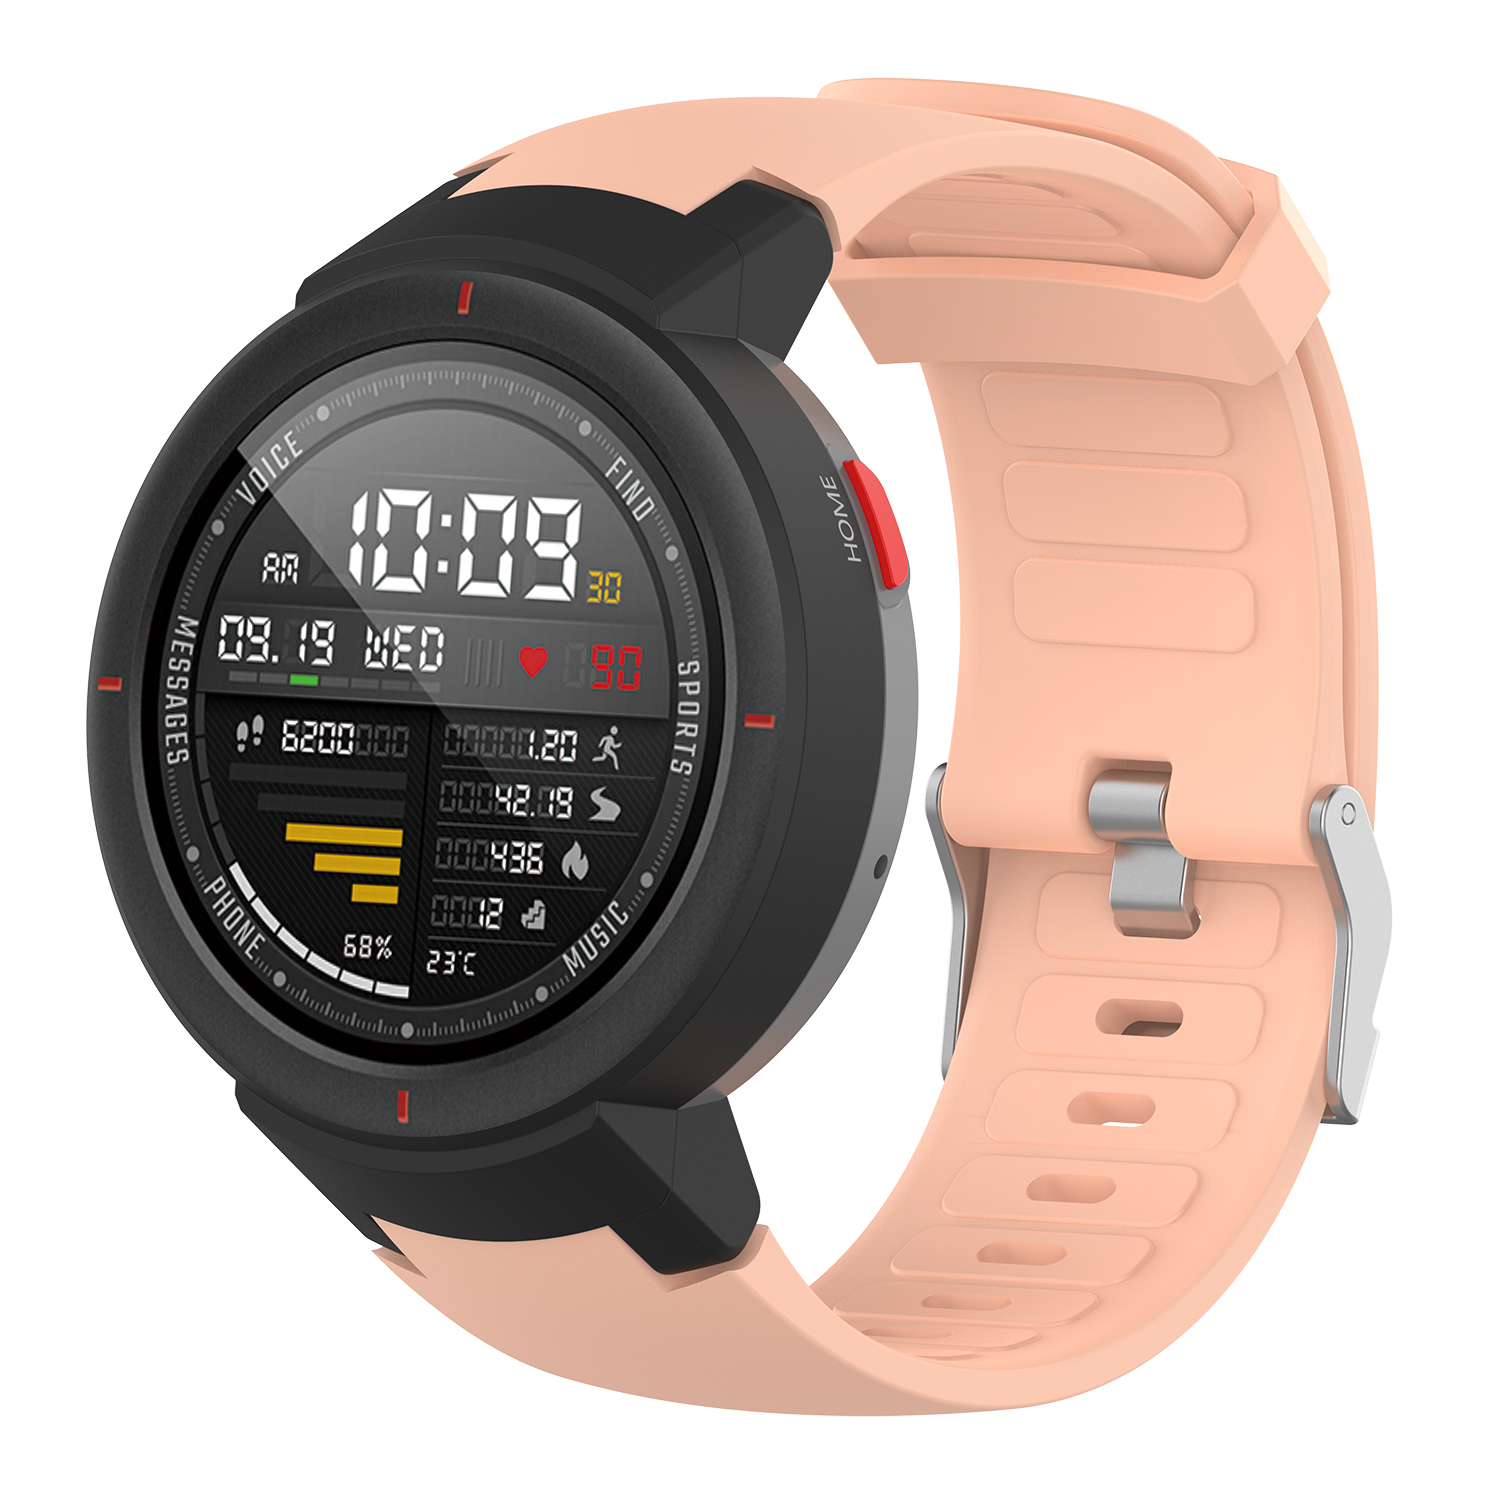 Bakeey-22mm-Multi-color-Silicone-Replacement-Strap-Smart-Watch-Band-For-Amazfit-Verge-1739374-16